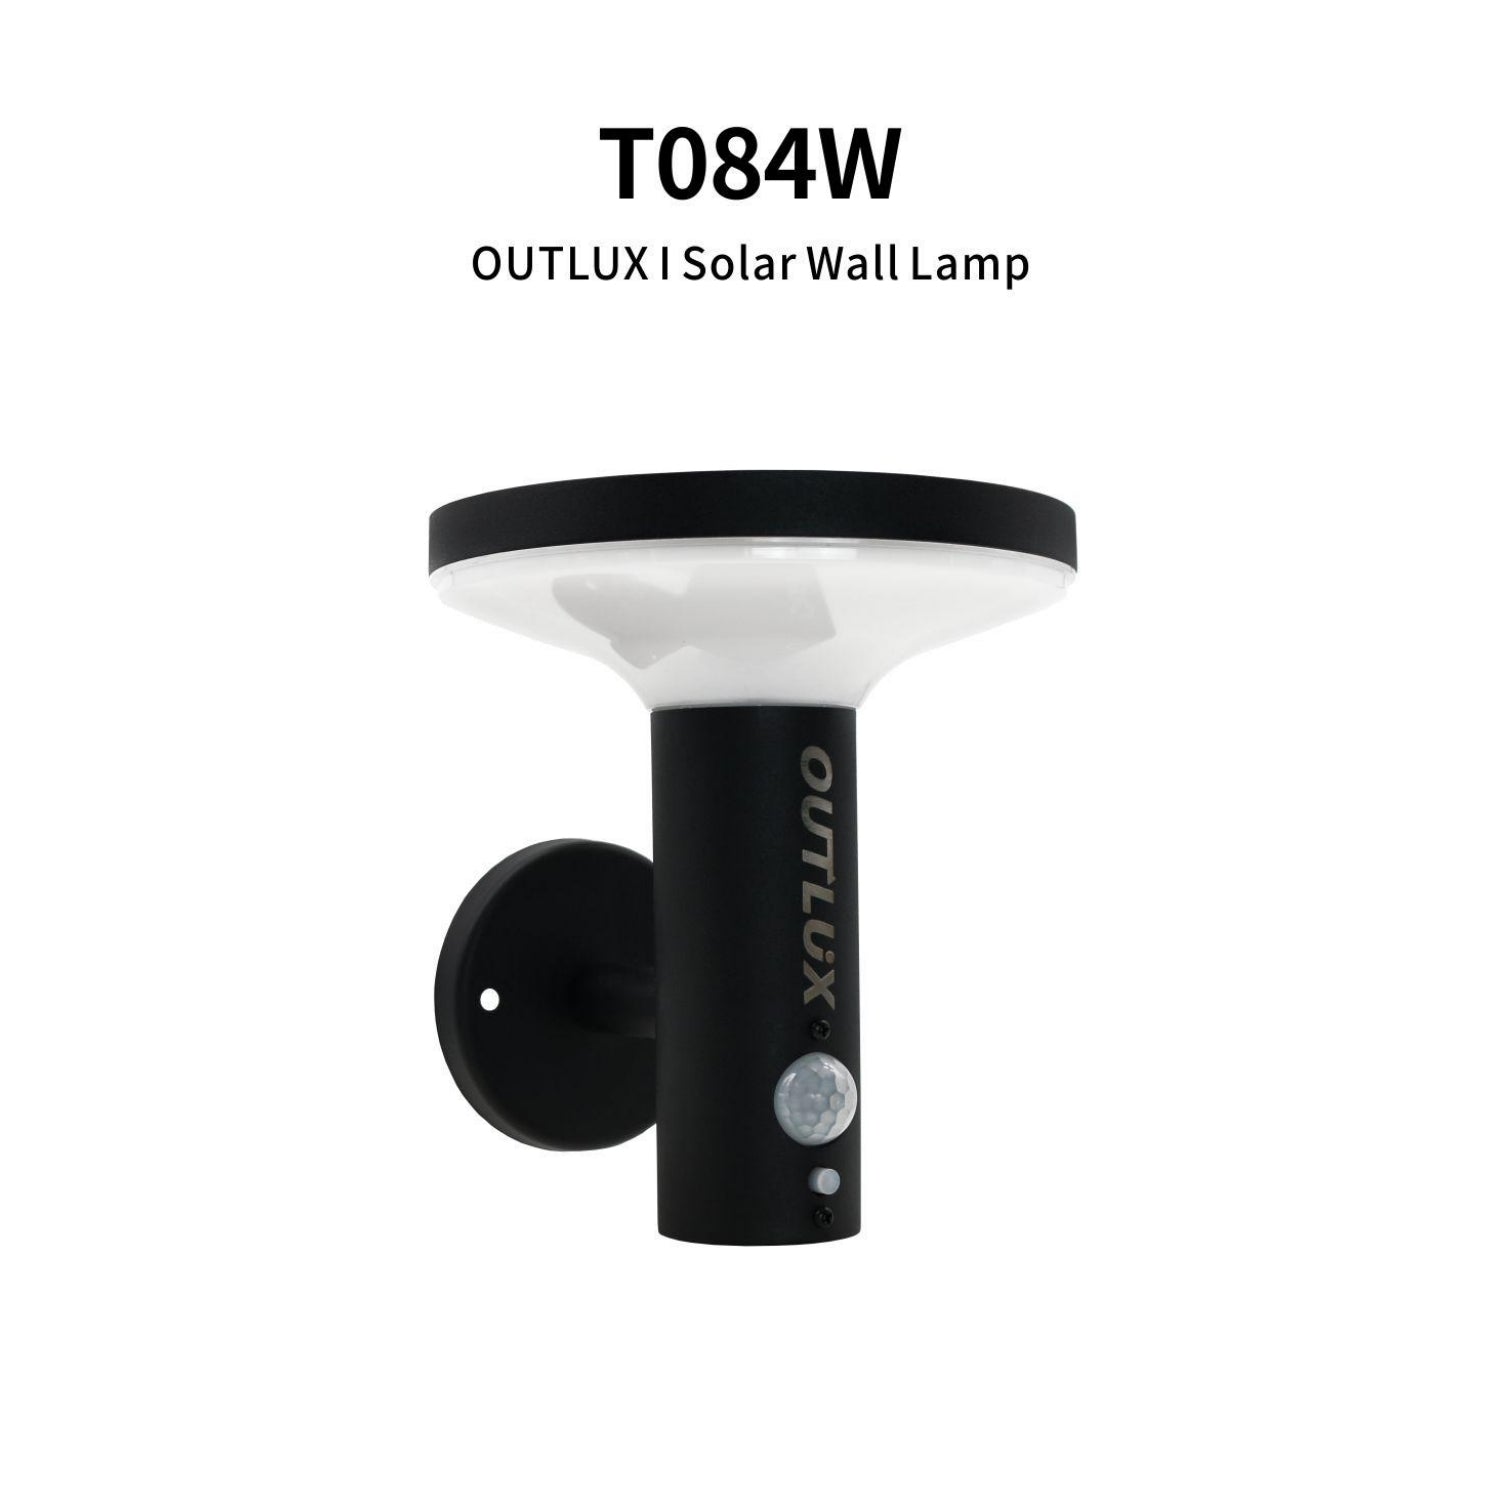 Outlux Solar Wall Lights- T084W